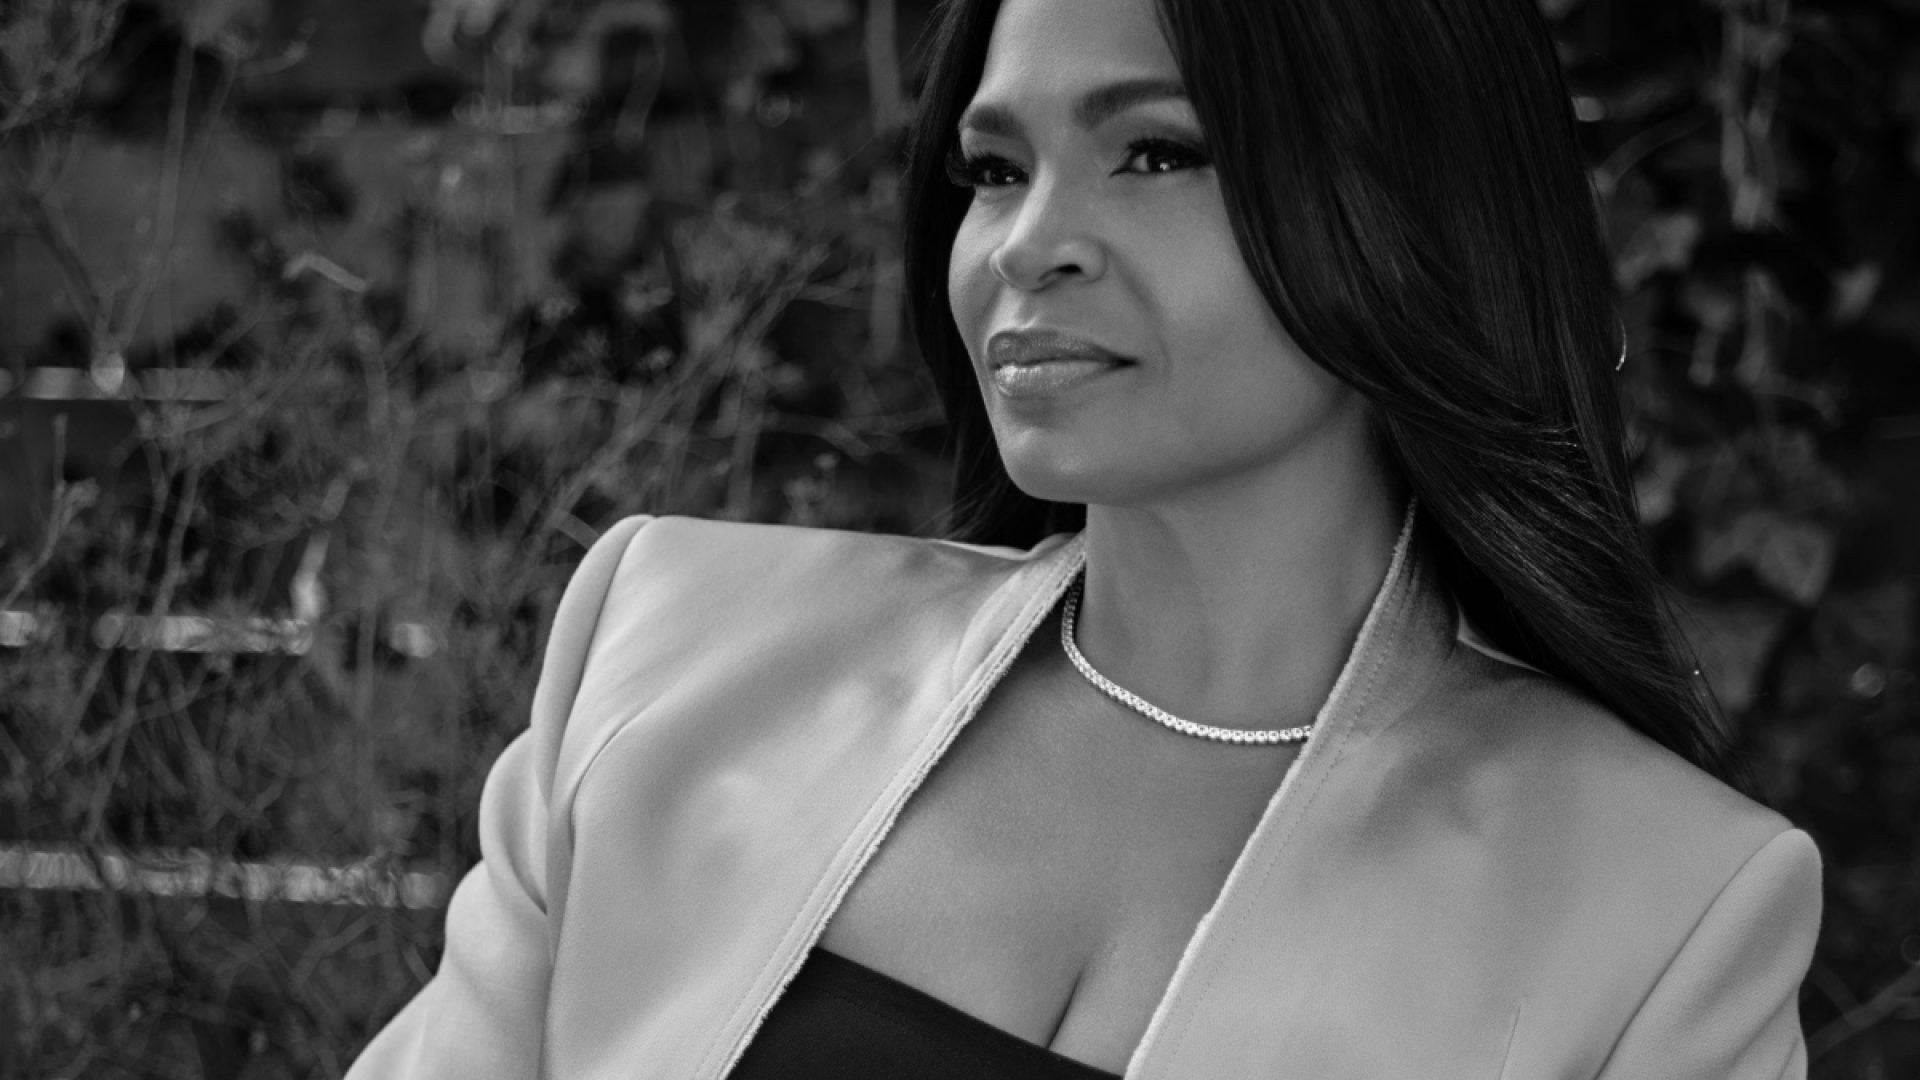 Exclusive: Nia Long’s Powerful Memoir To Be Published By Gallery Books Imprint 13a